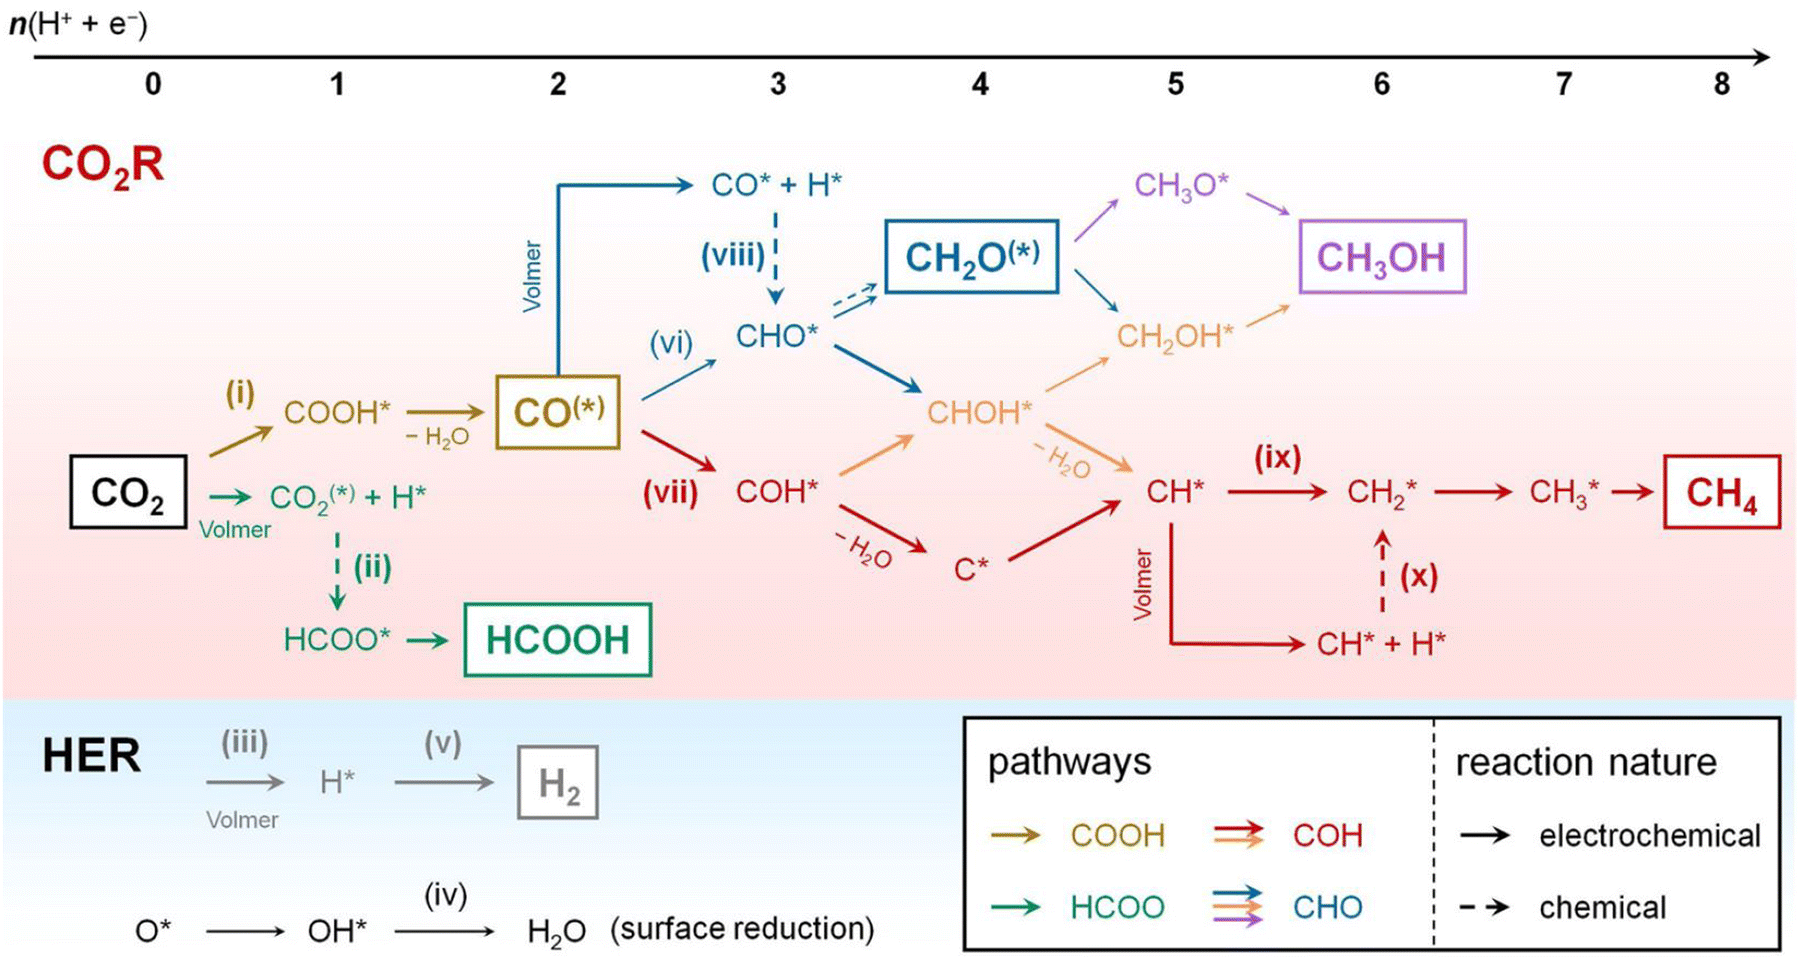 Integrated CO 2 capture and electrochemical upgradation: the underpinning  mechanism and techno-chemical analysis - Chemical Society Reviews (RSC  Publishing) DOI:10.1039/D2CS00512C